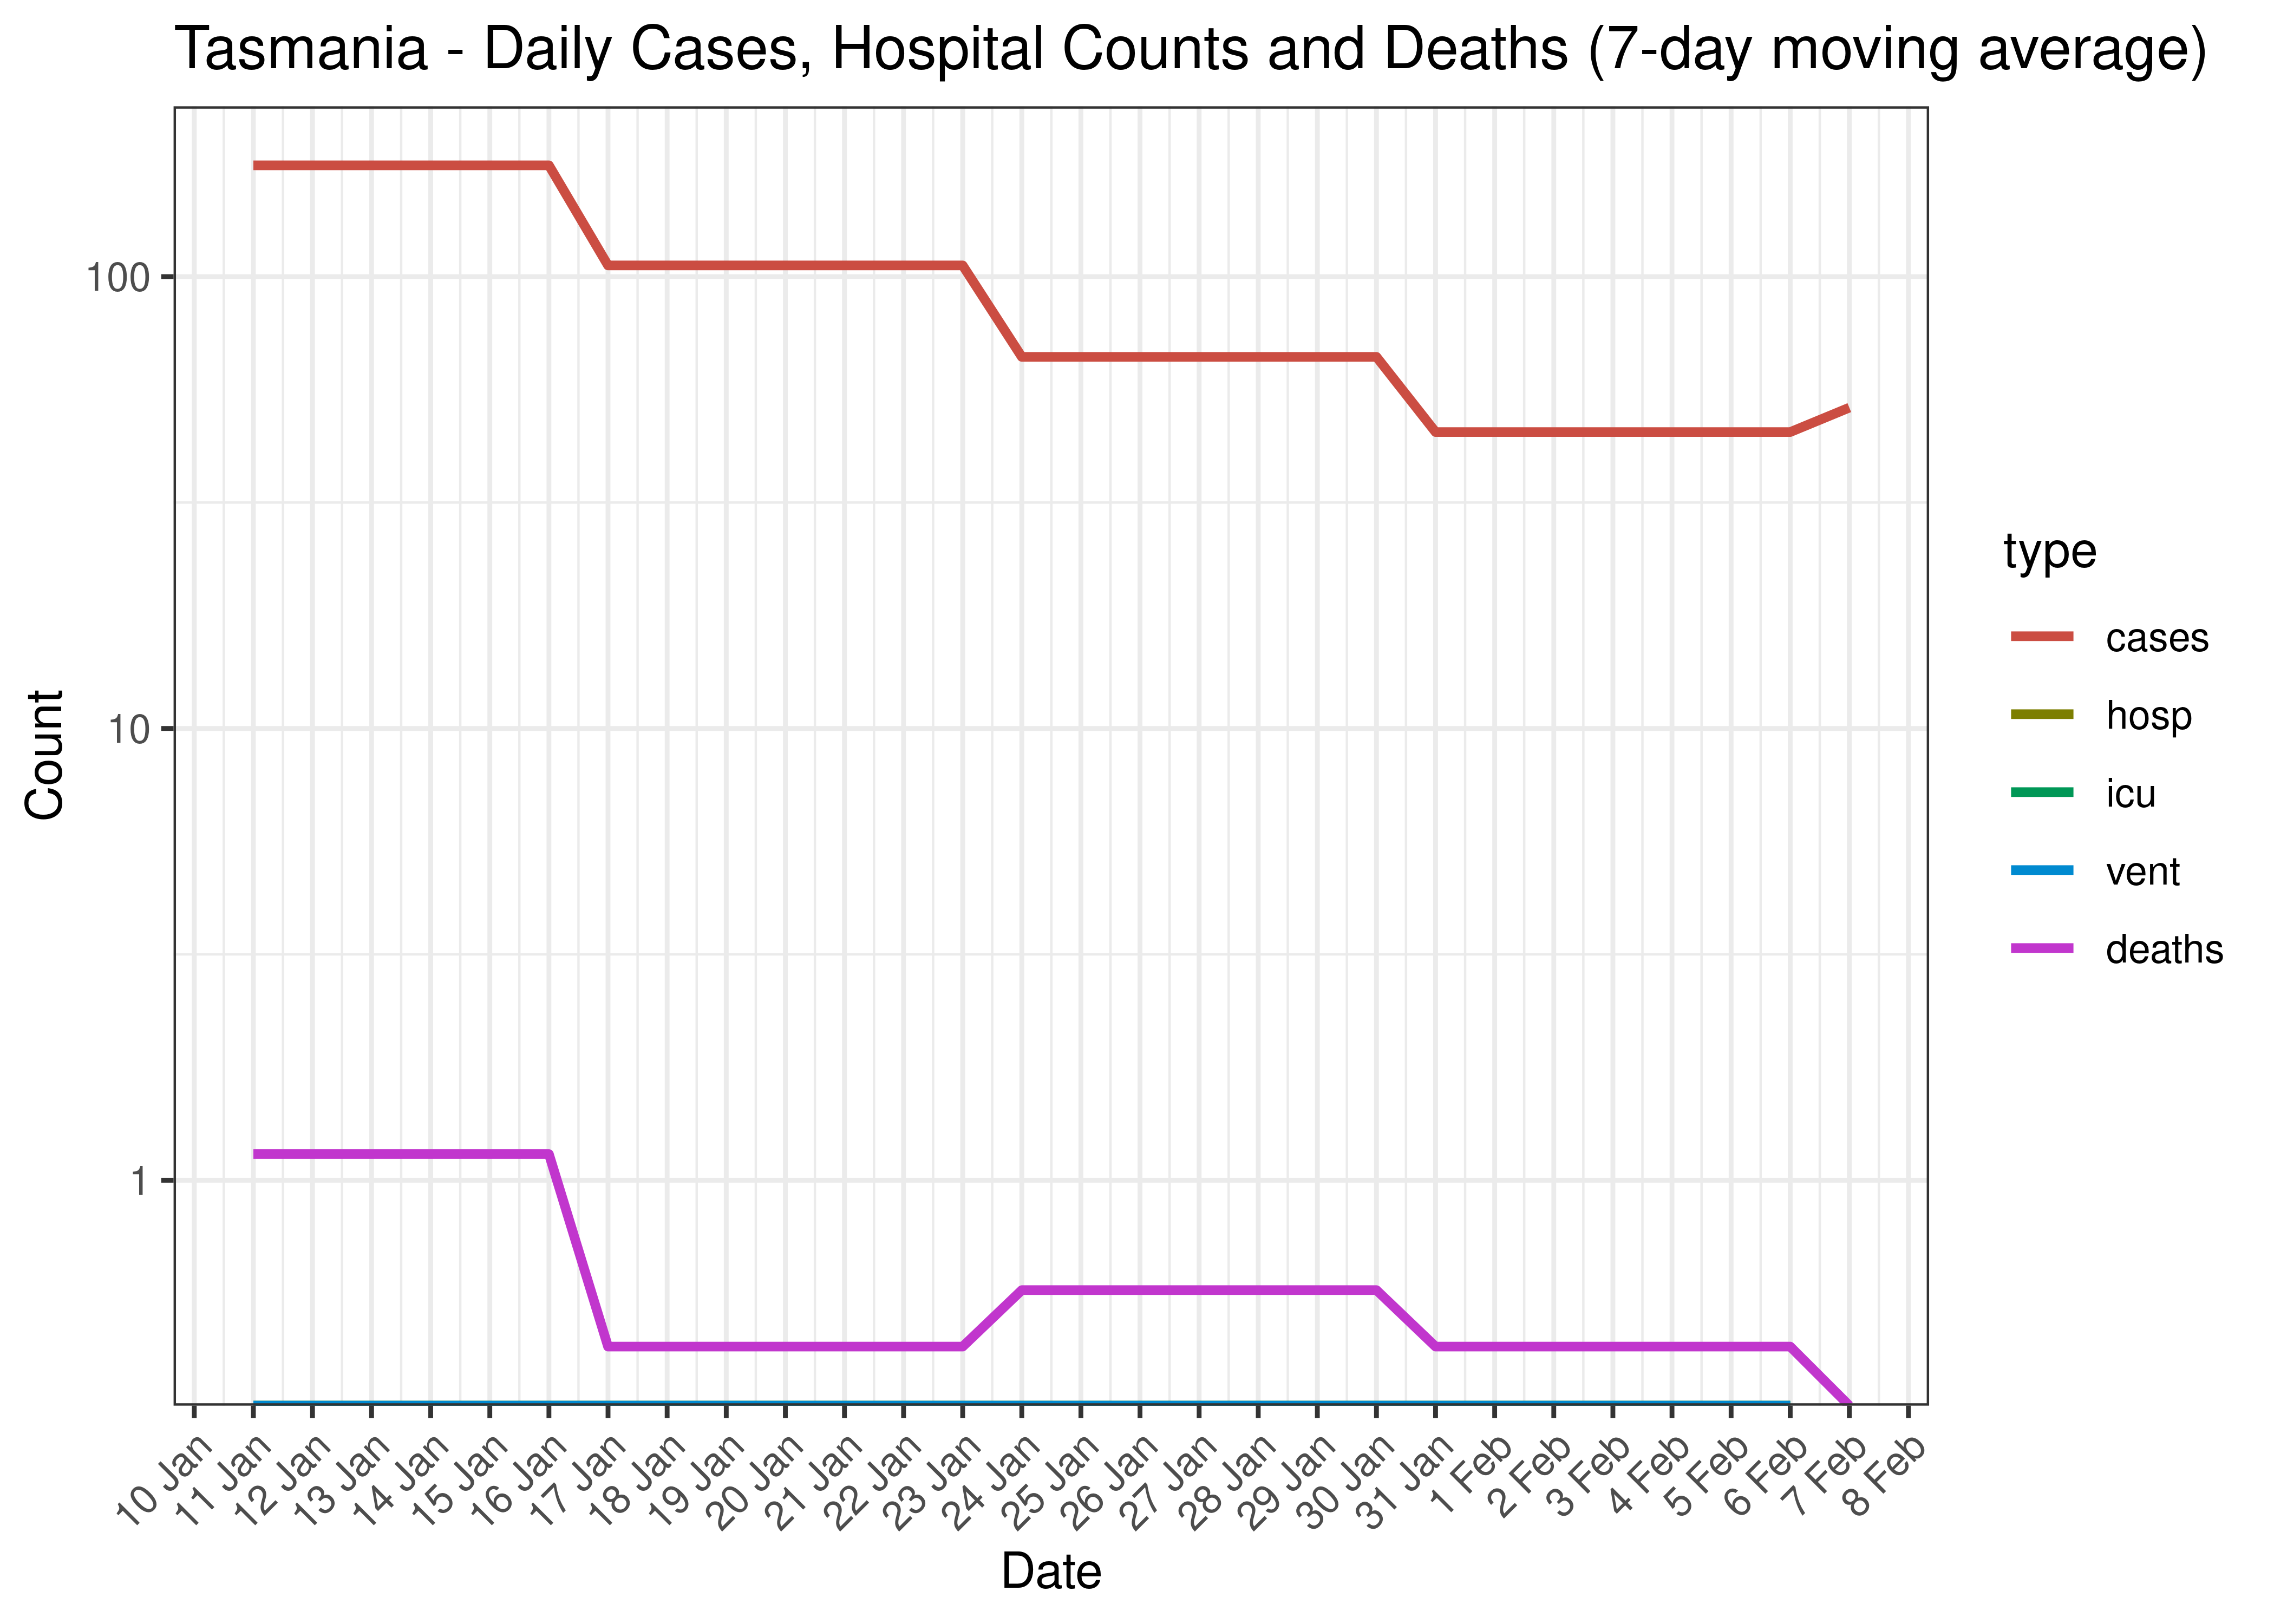 Tasmania - Daily Cases, Admissions and Deaths for Last 30-days (7-day moving average)